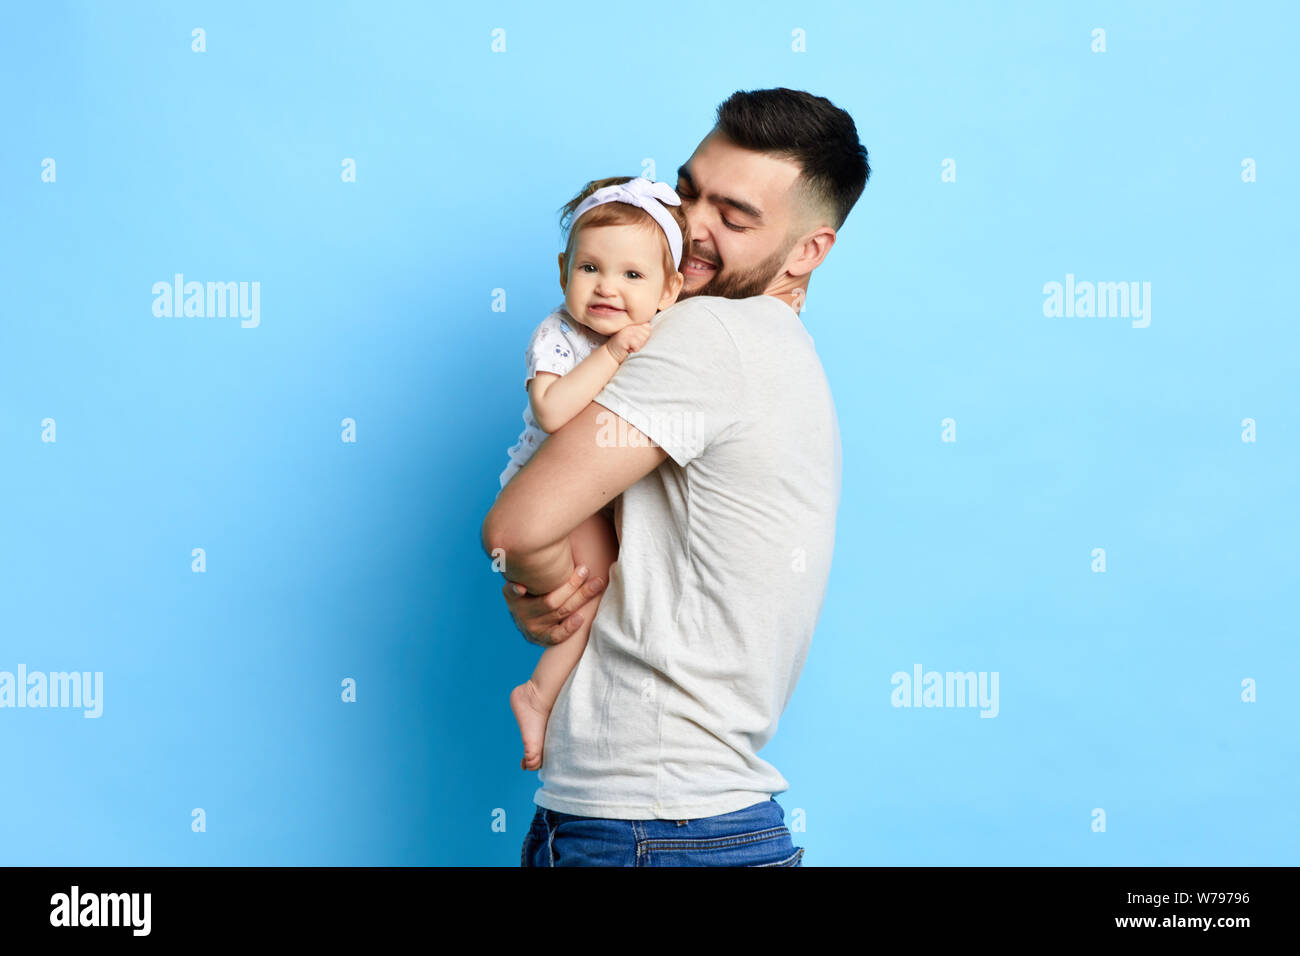 caring best daddy hugging his daughter, expressing love. isolated blue background. studioshot. Stock Photo